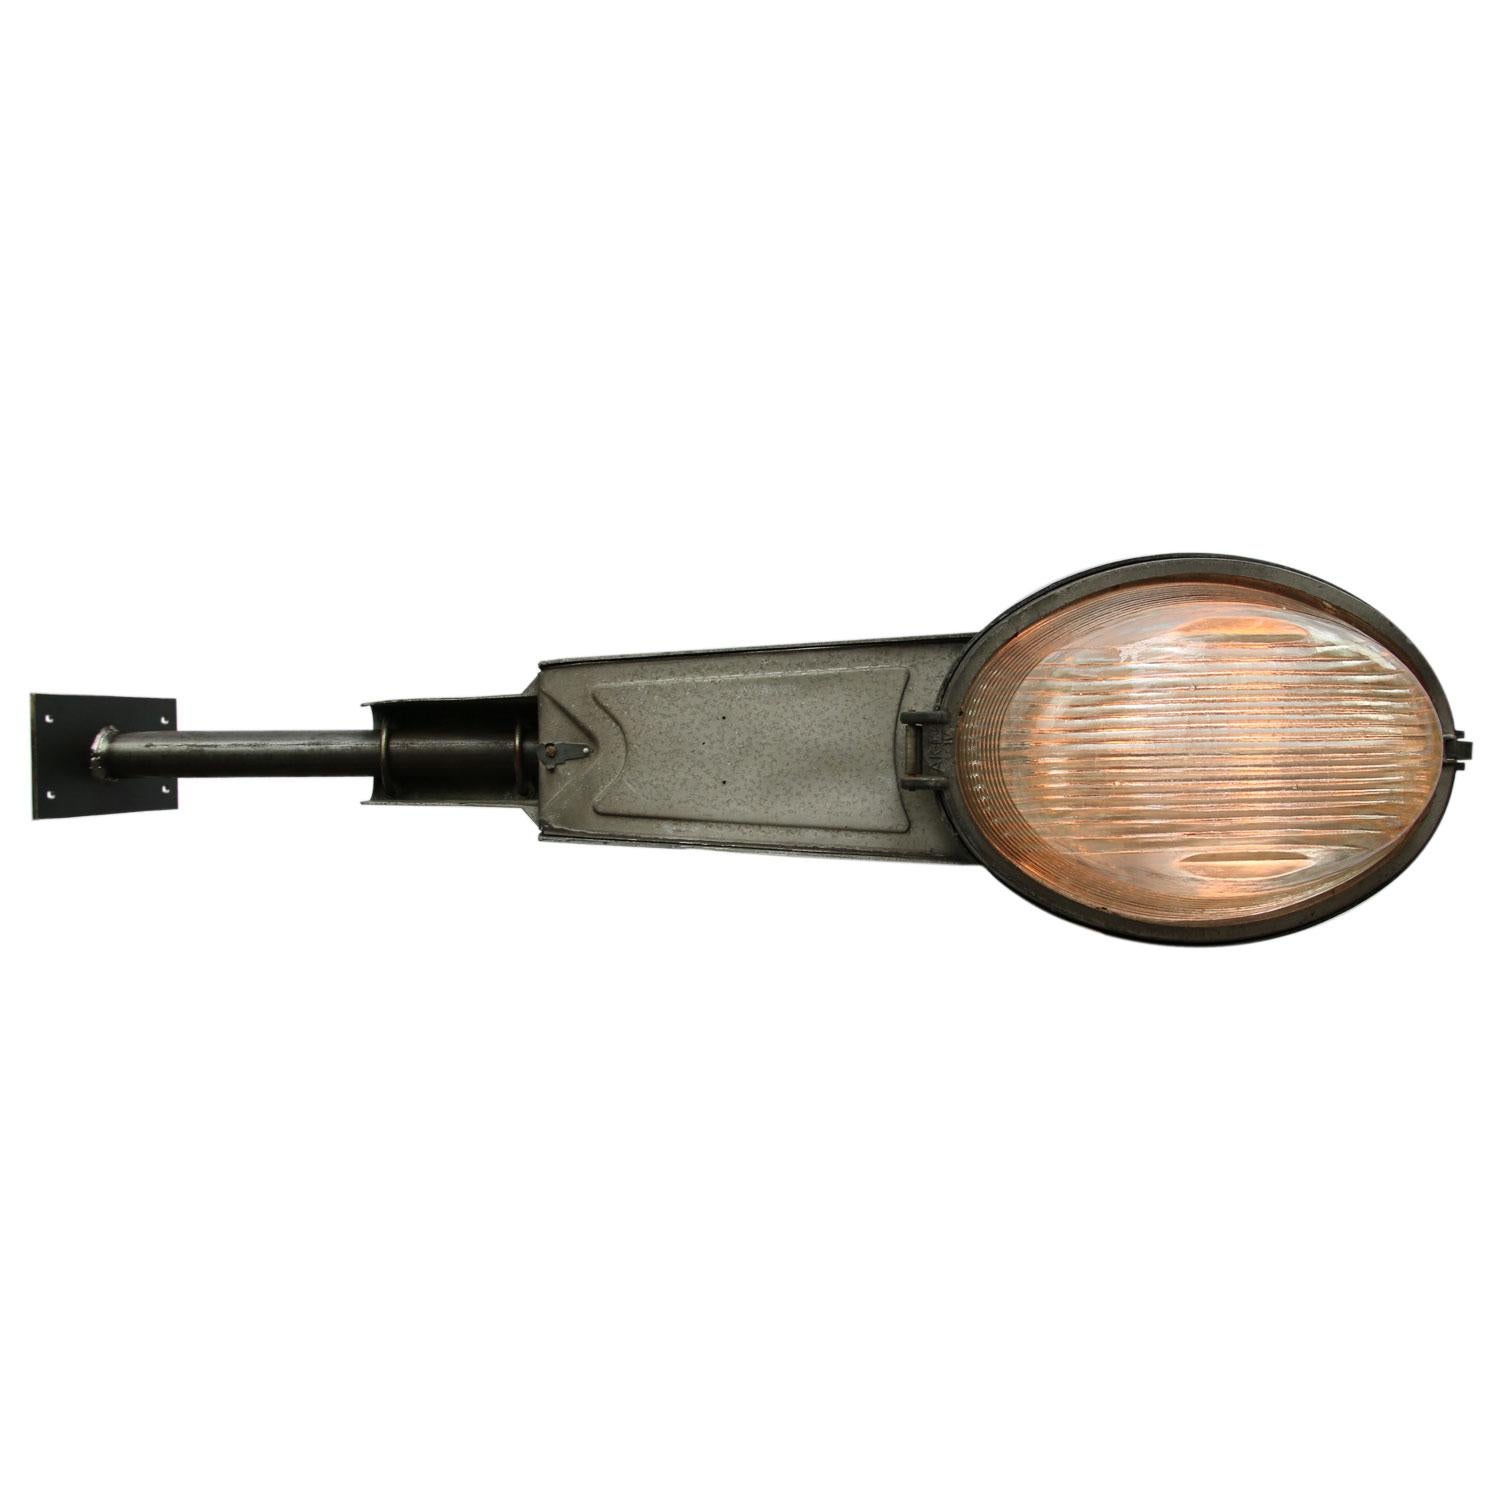 Large street wall light.
Aluminium body with round Holophane glass.

Weight 7.00 kg / 15.4 lb

Priced per individual item. All lamps have been made suitable by international standards for incandescent light bulbs, energy-efficient and LED